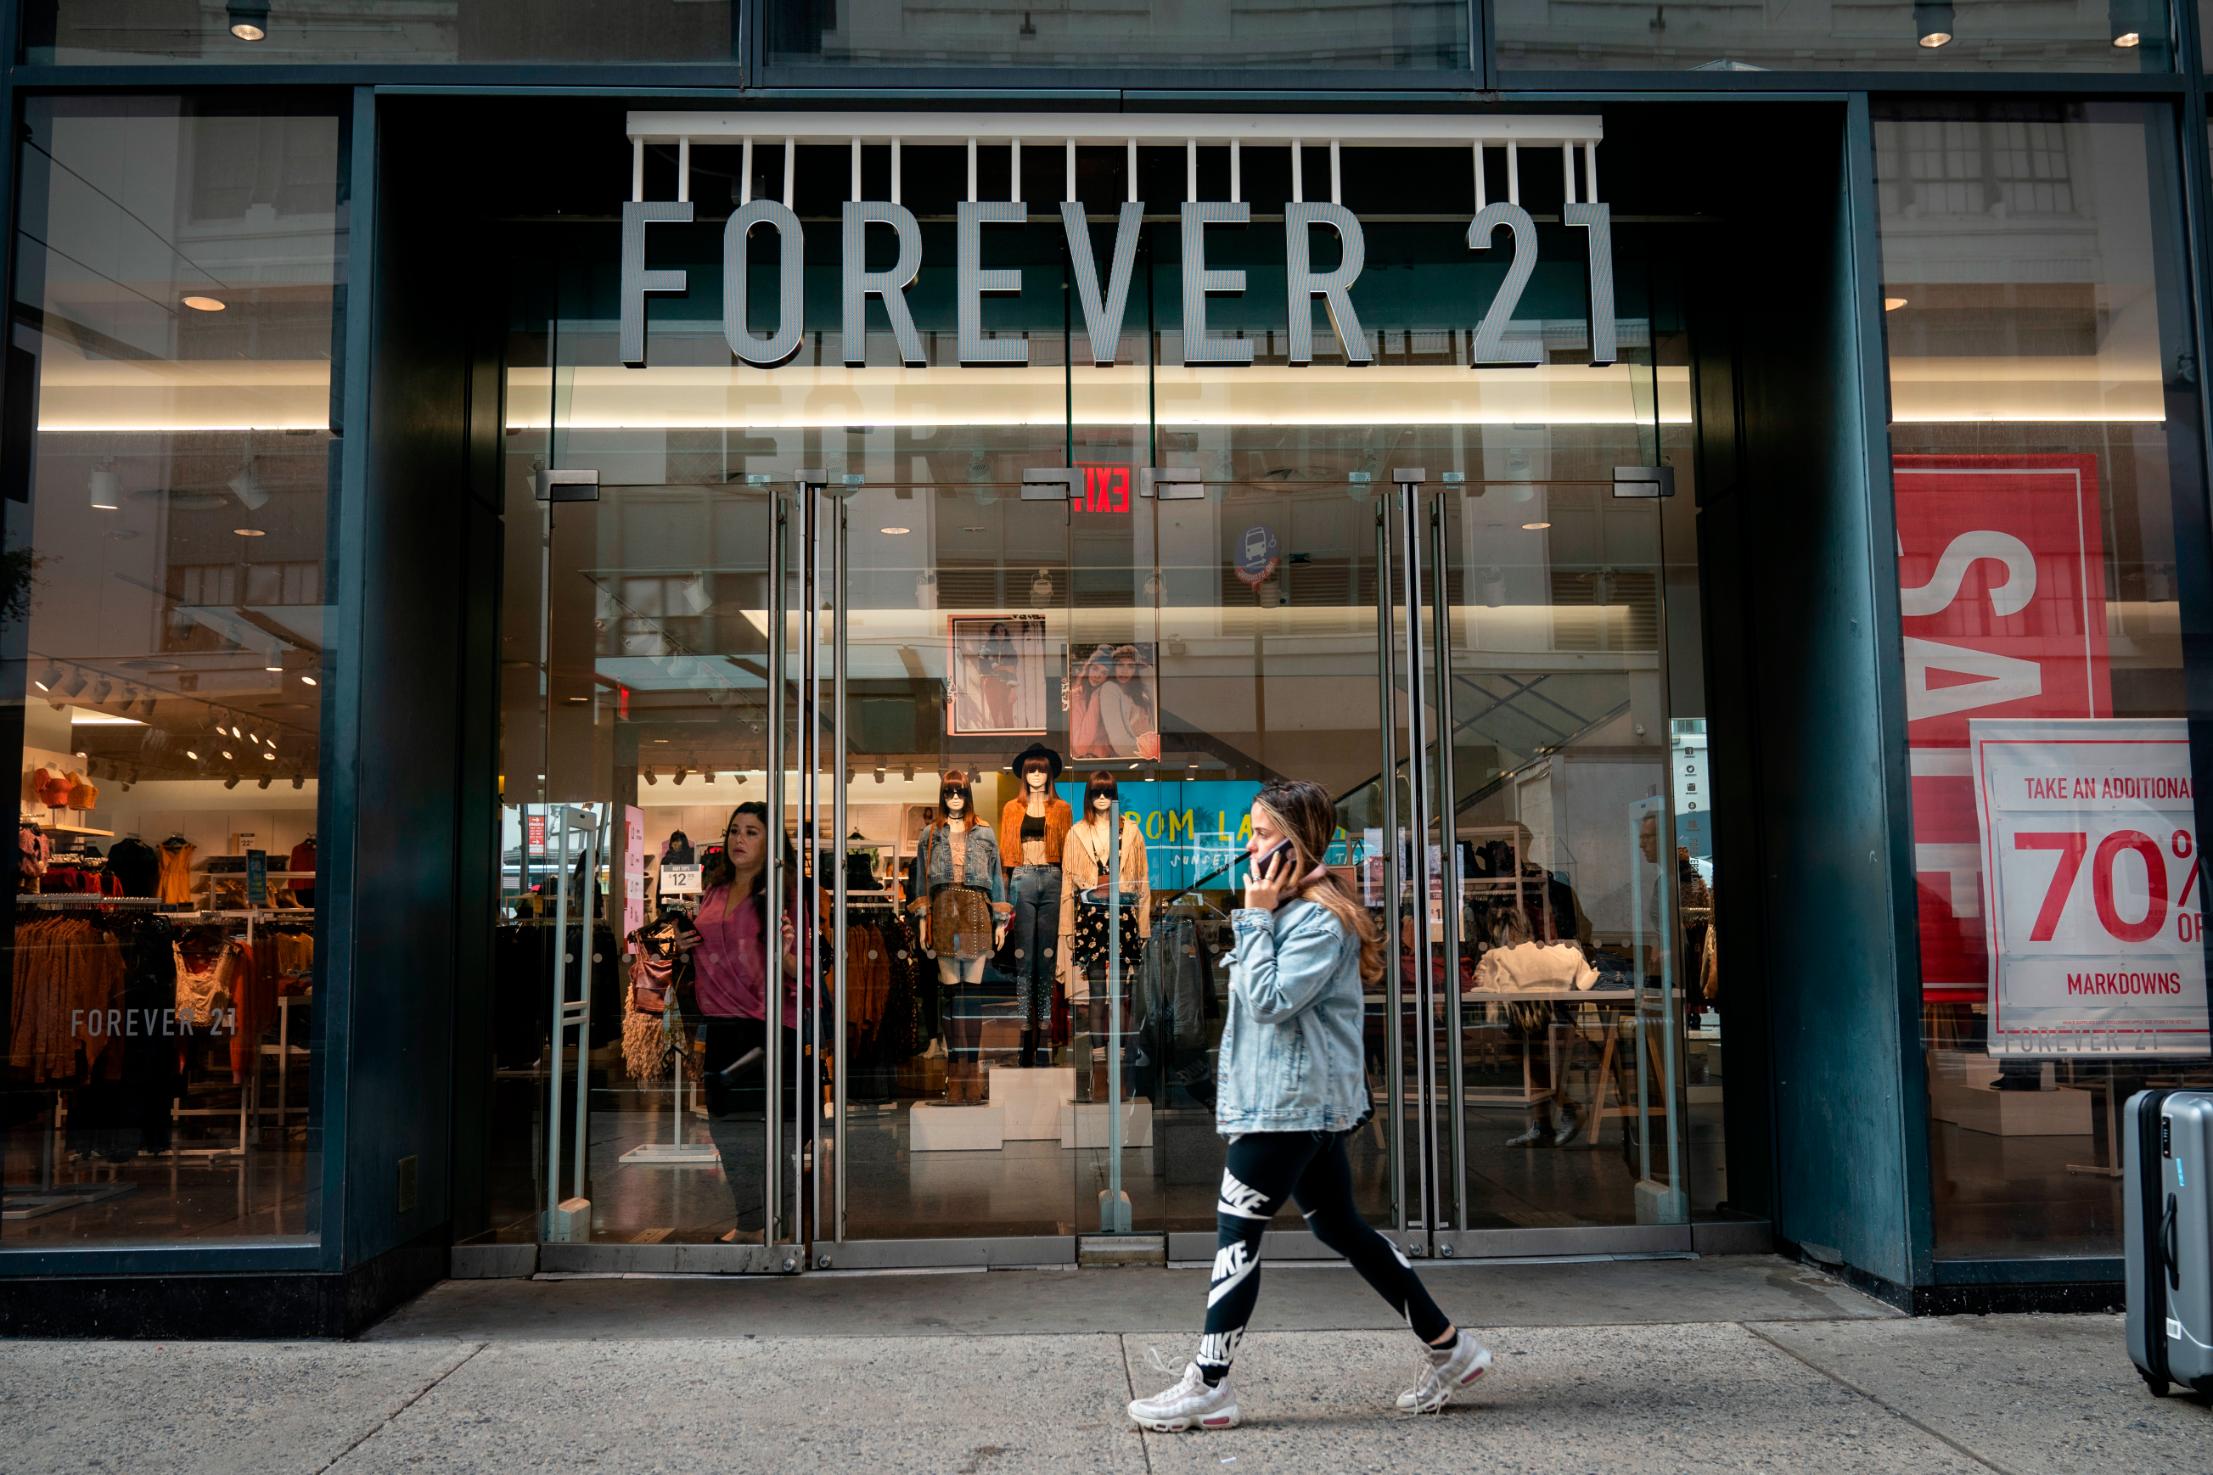 Forever 21 After Christmas 2022 Sales, Hours, Ads & Deals – What To Expect